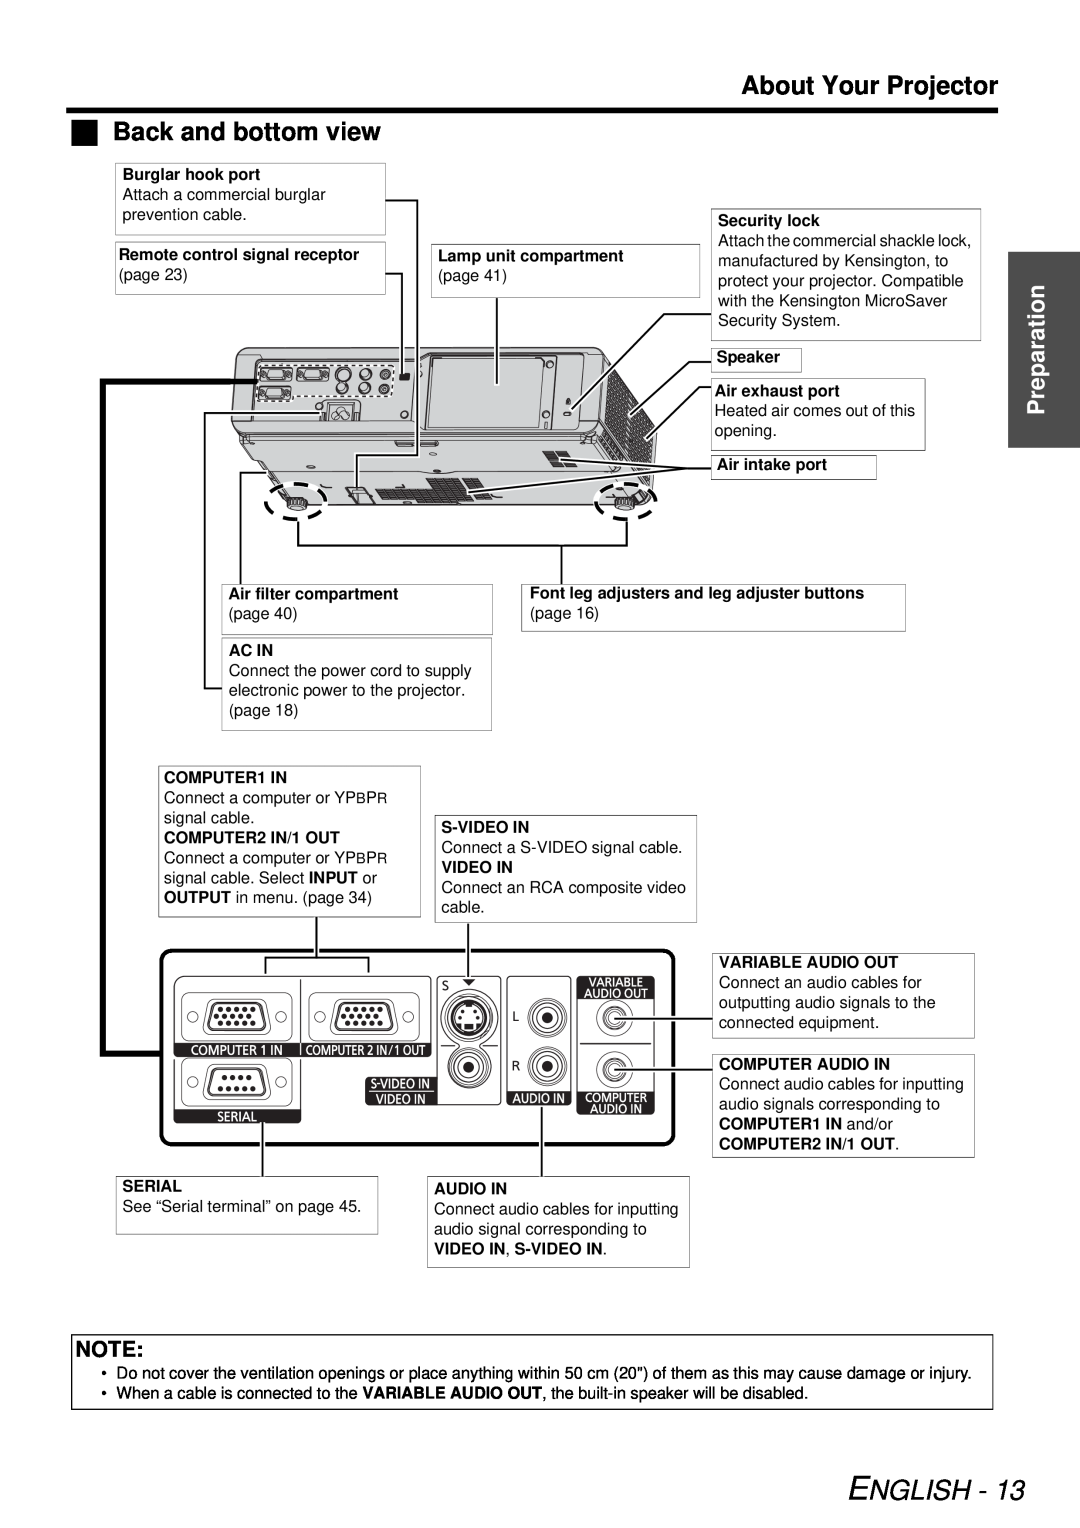 Panasonic PT-LB78U manual Back and bottom view, About Your Projector, English, Preparation 